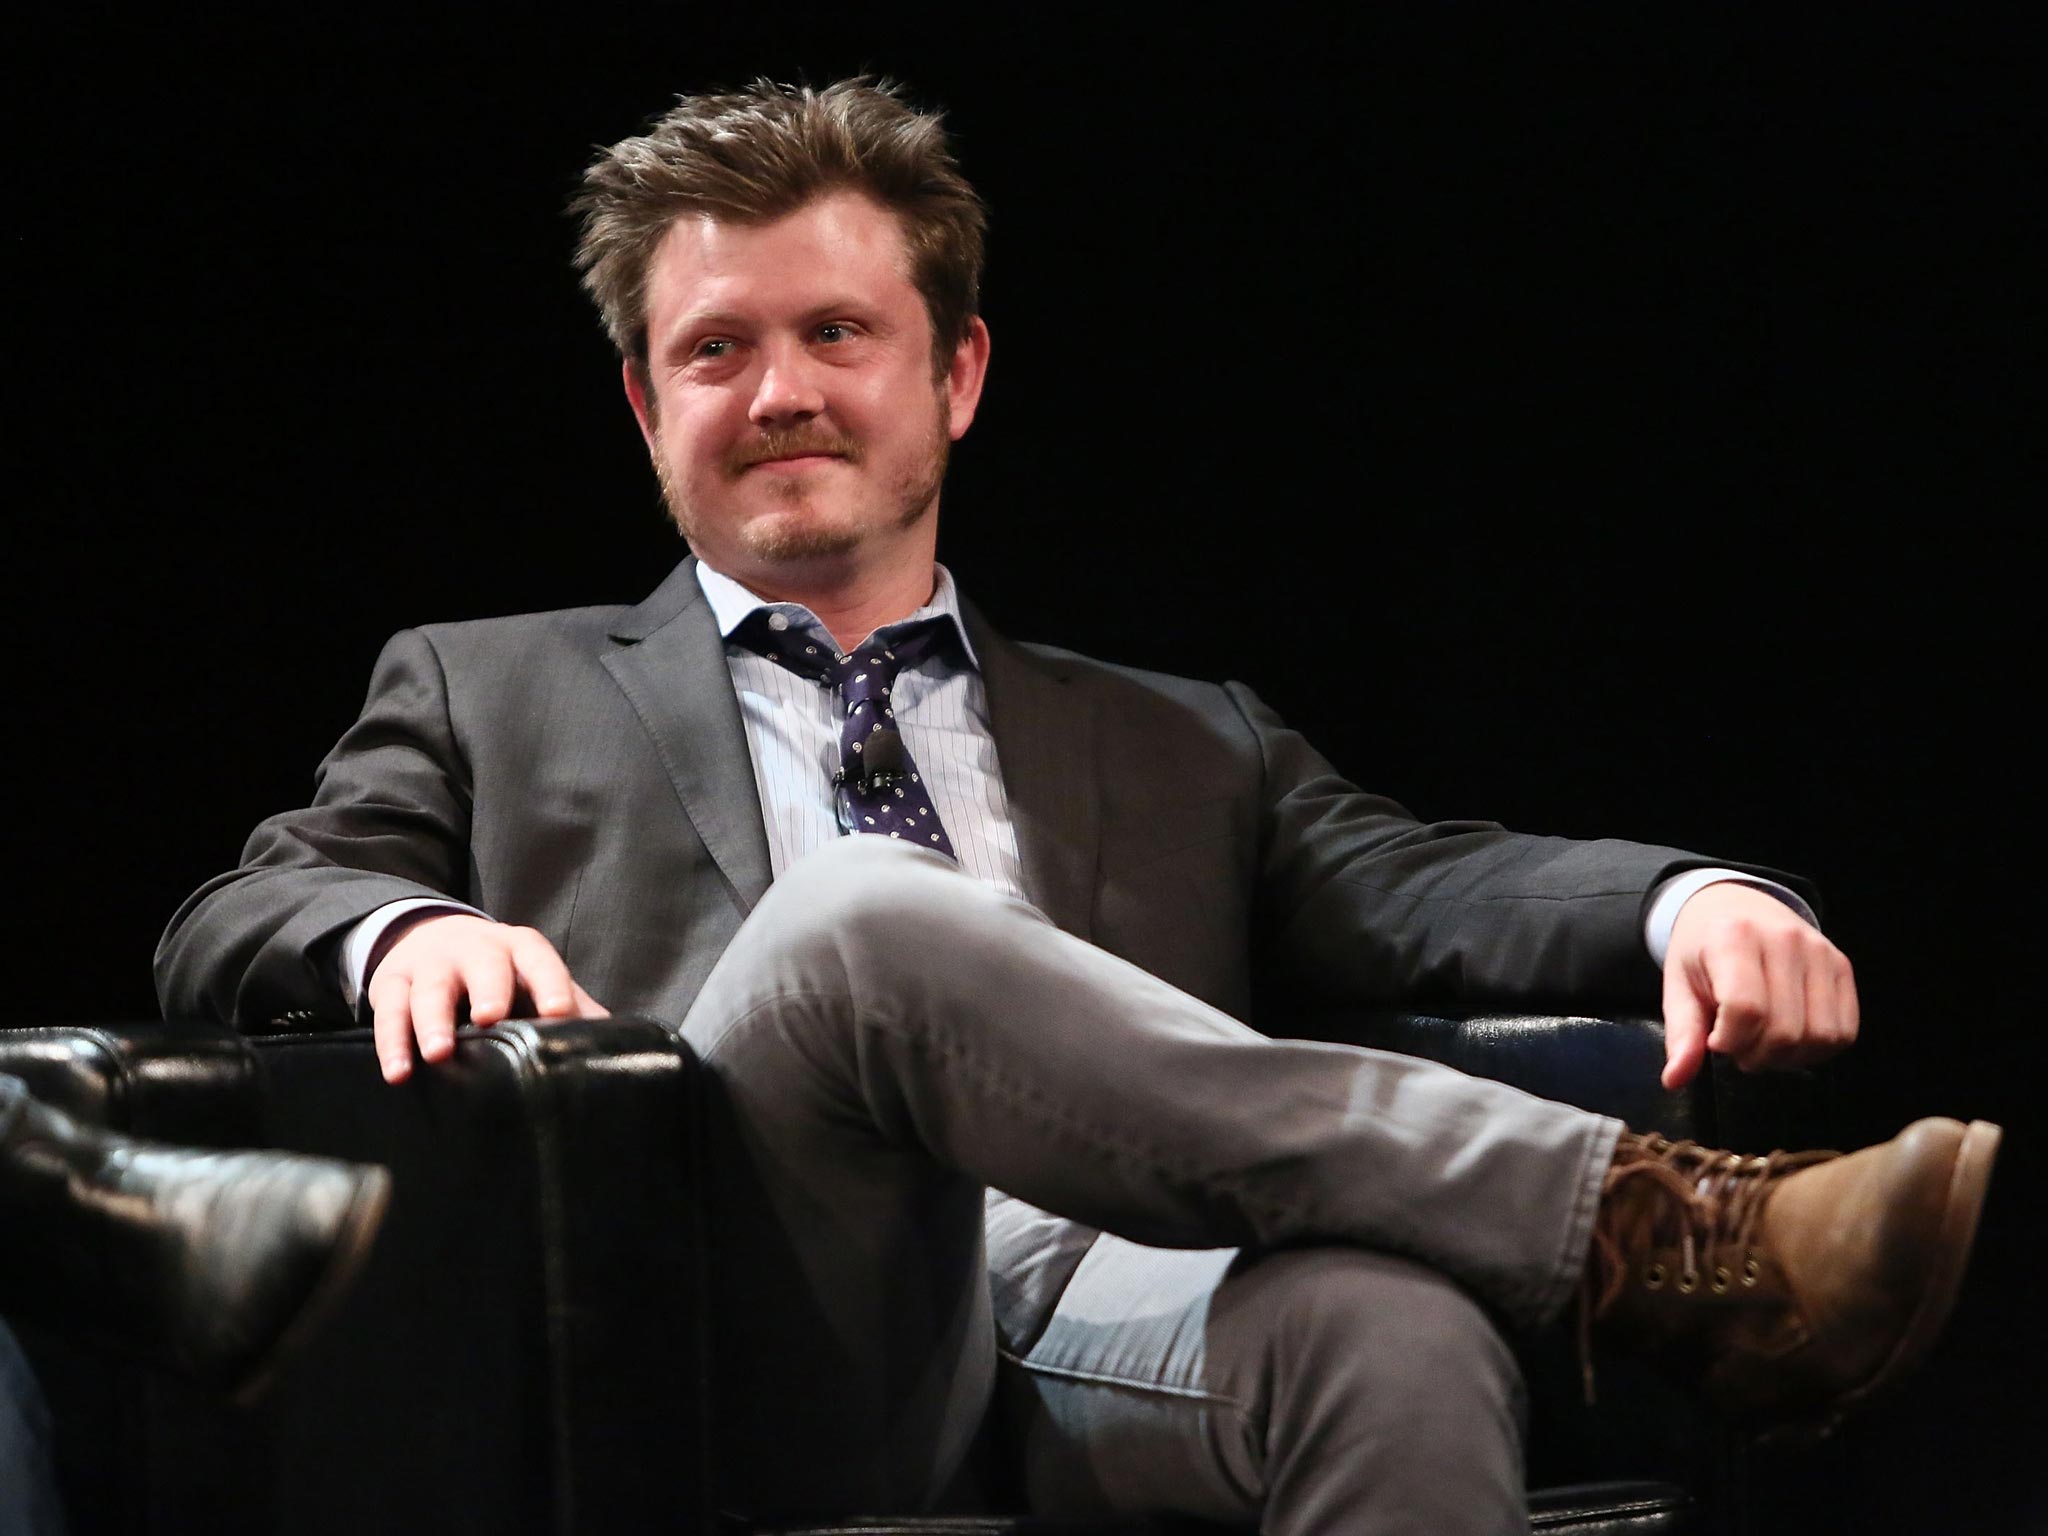 Beau Willimon's replacement has yet to be announced (Pic: Getty)